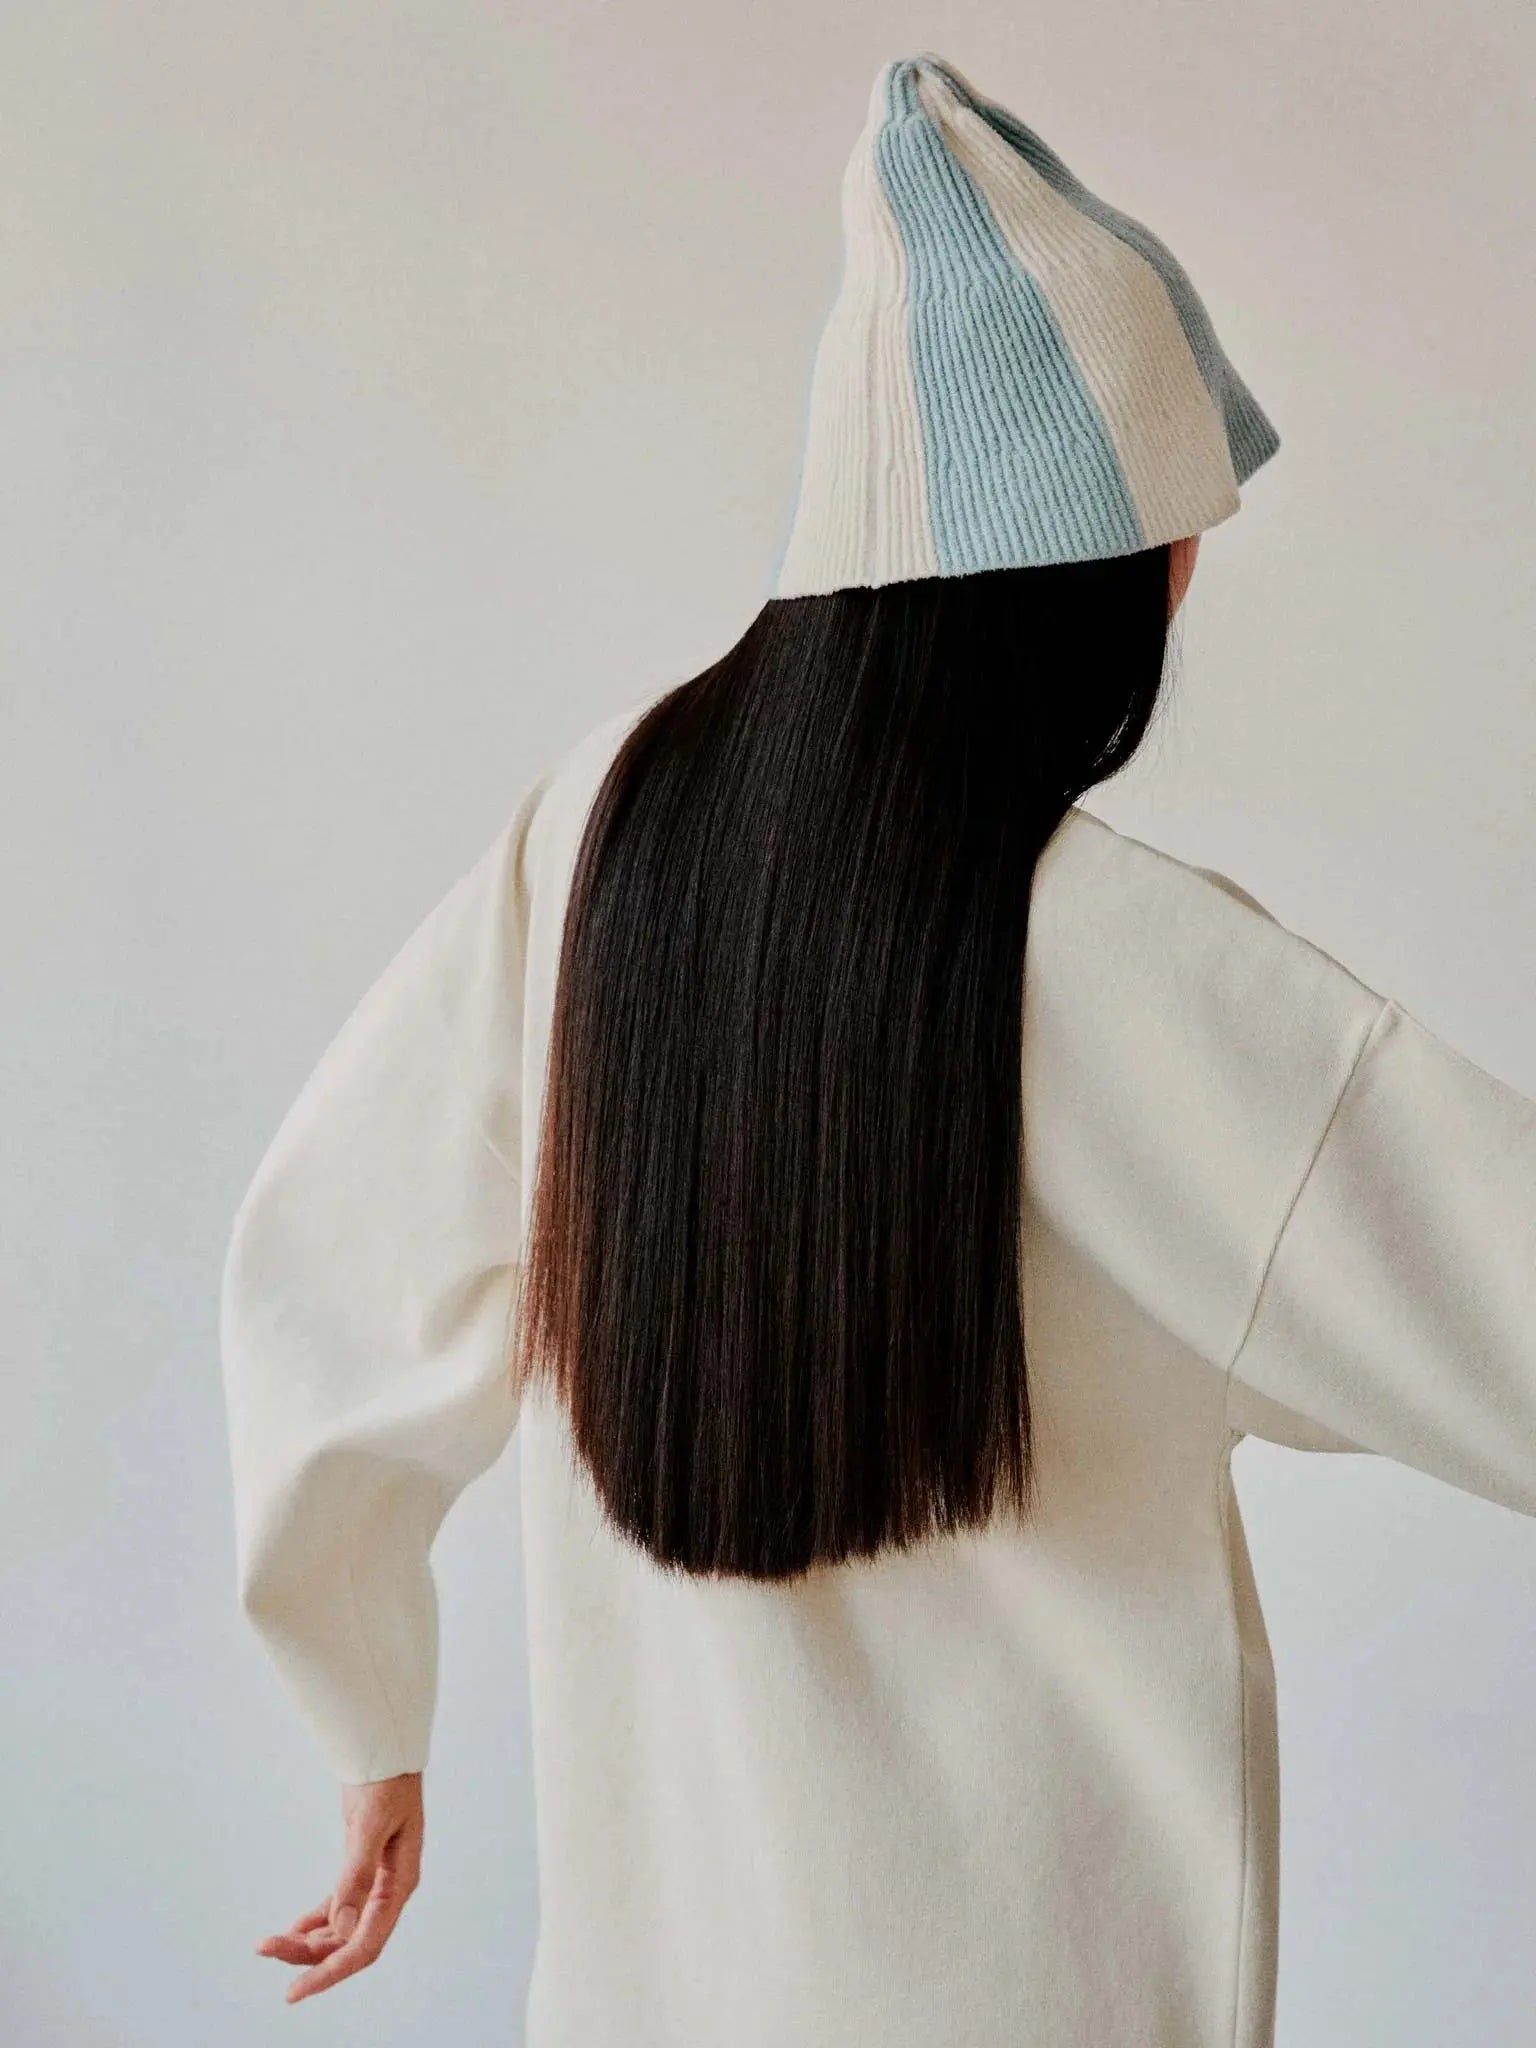 A conical knitted hat with alternating blue and white vertical stripes, available at Bassalstore. The Yuzu Hat by Rus features a ribbed texture of the fabric that is clearly visible, and the hat has a slightly flared brim at the bottom. The background is plain white.